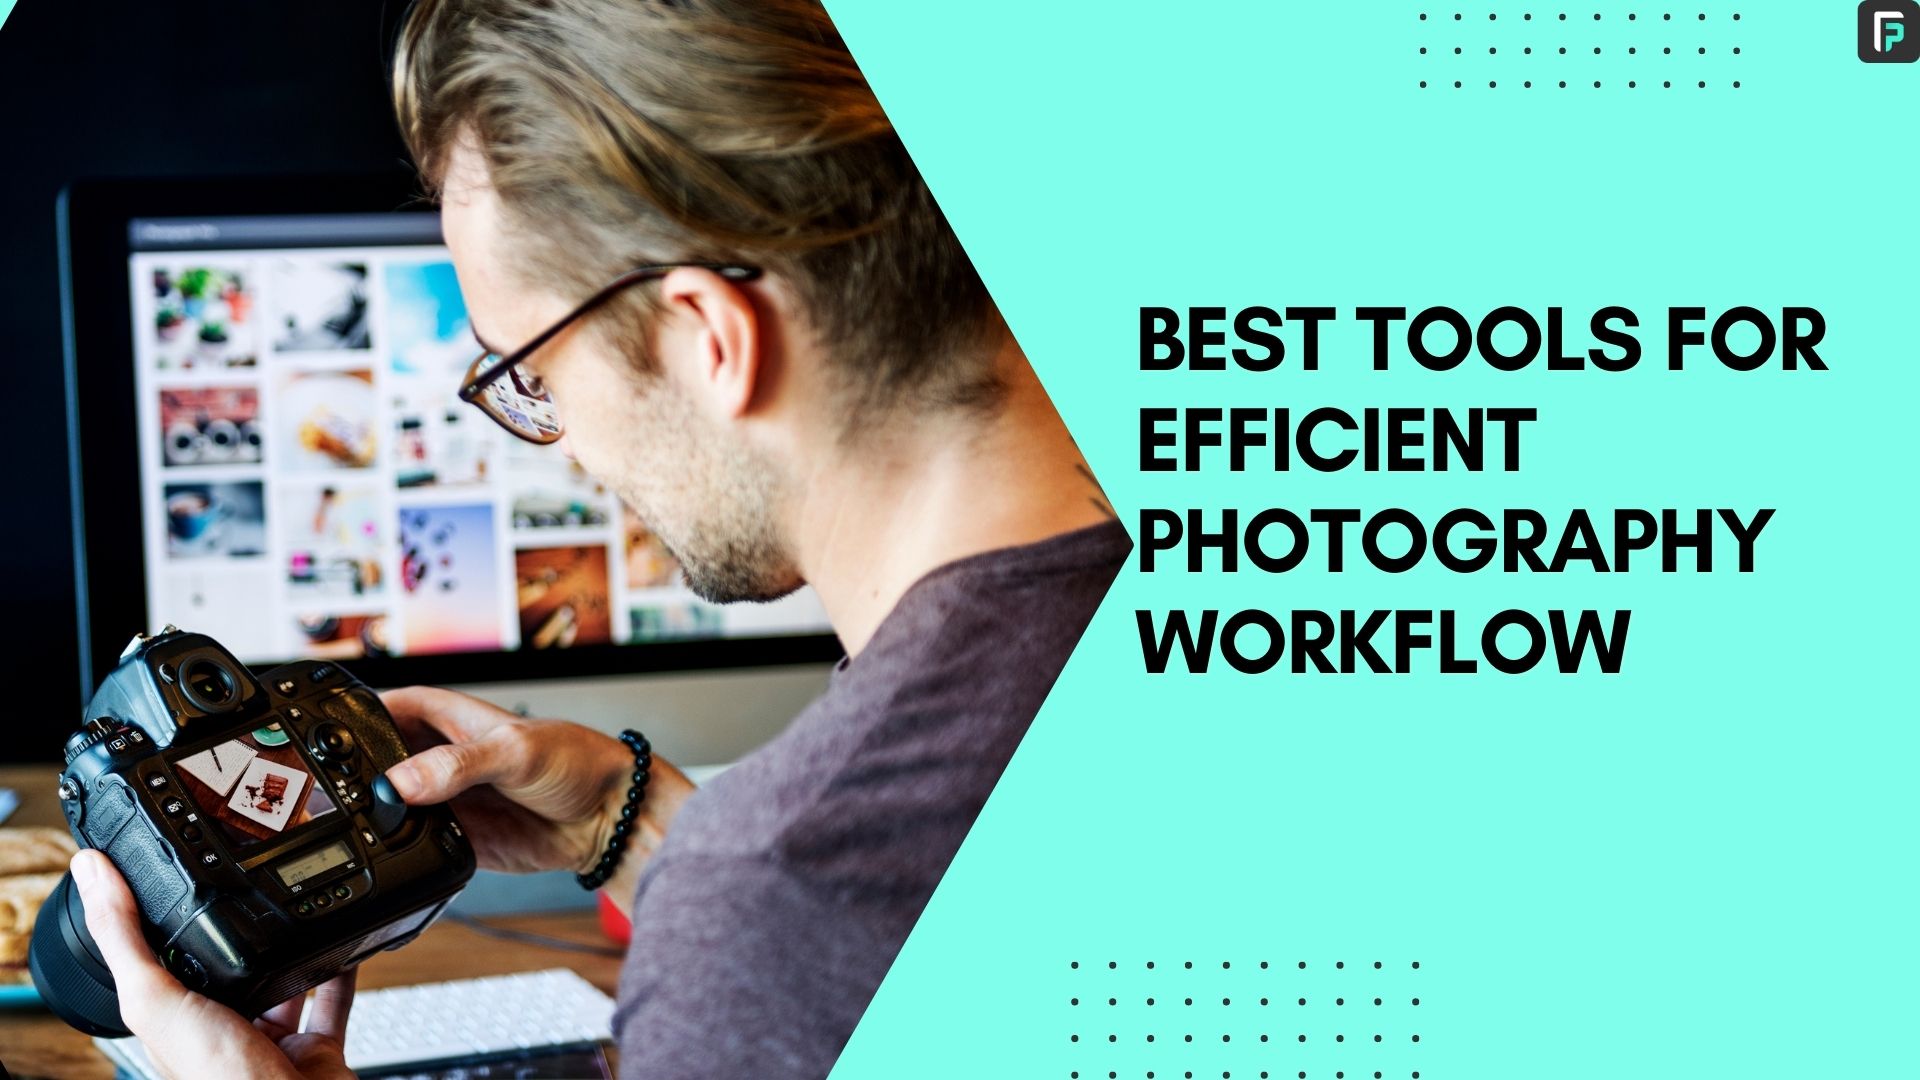 7 best tools for efficient photography workflow